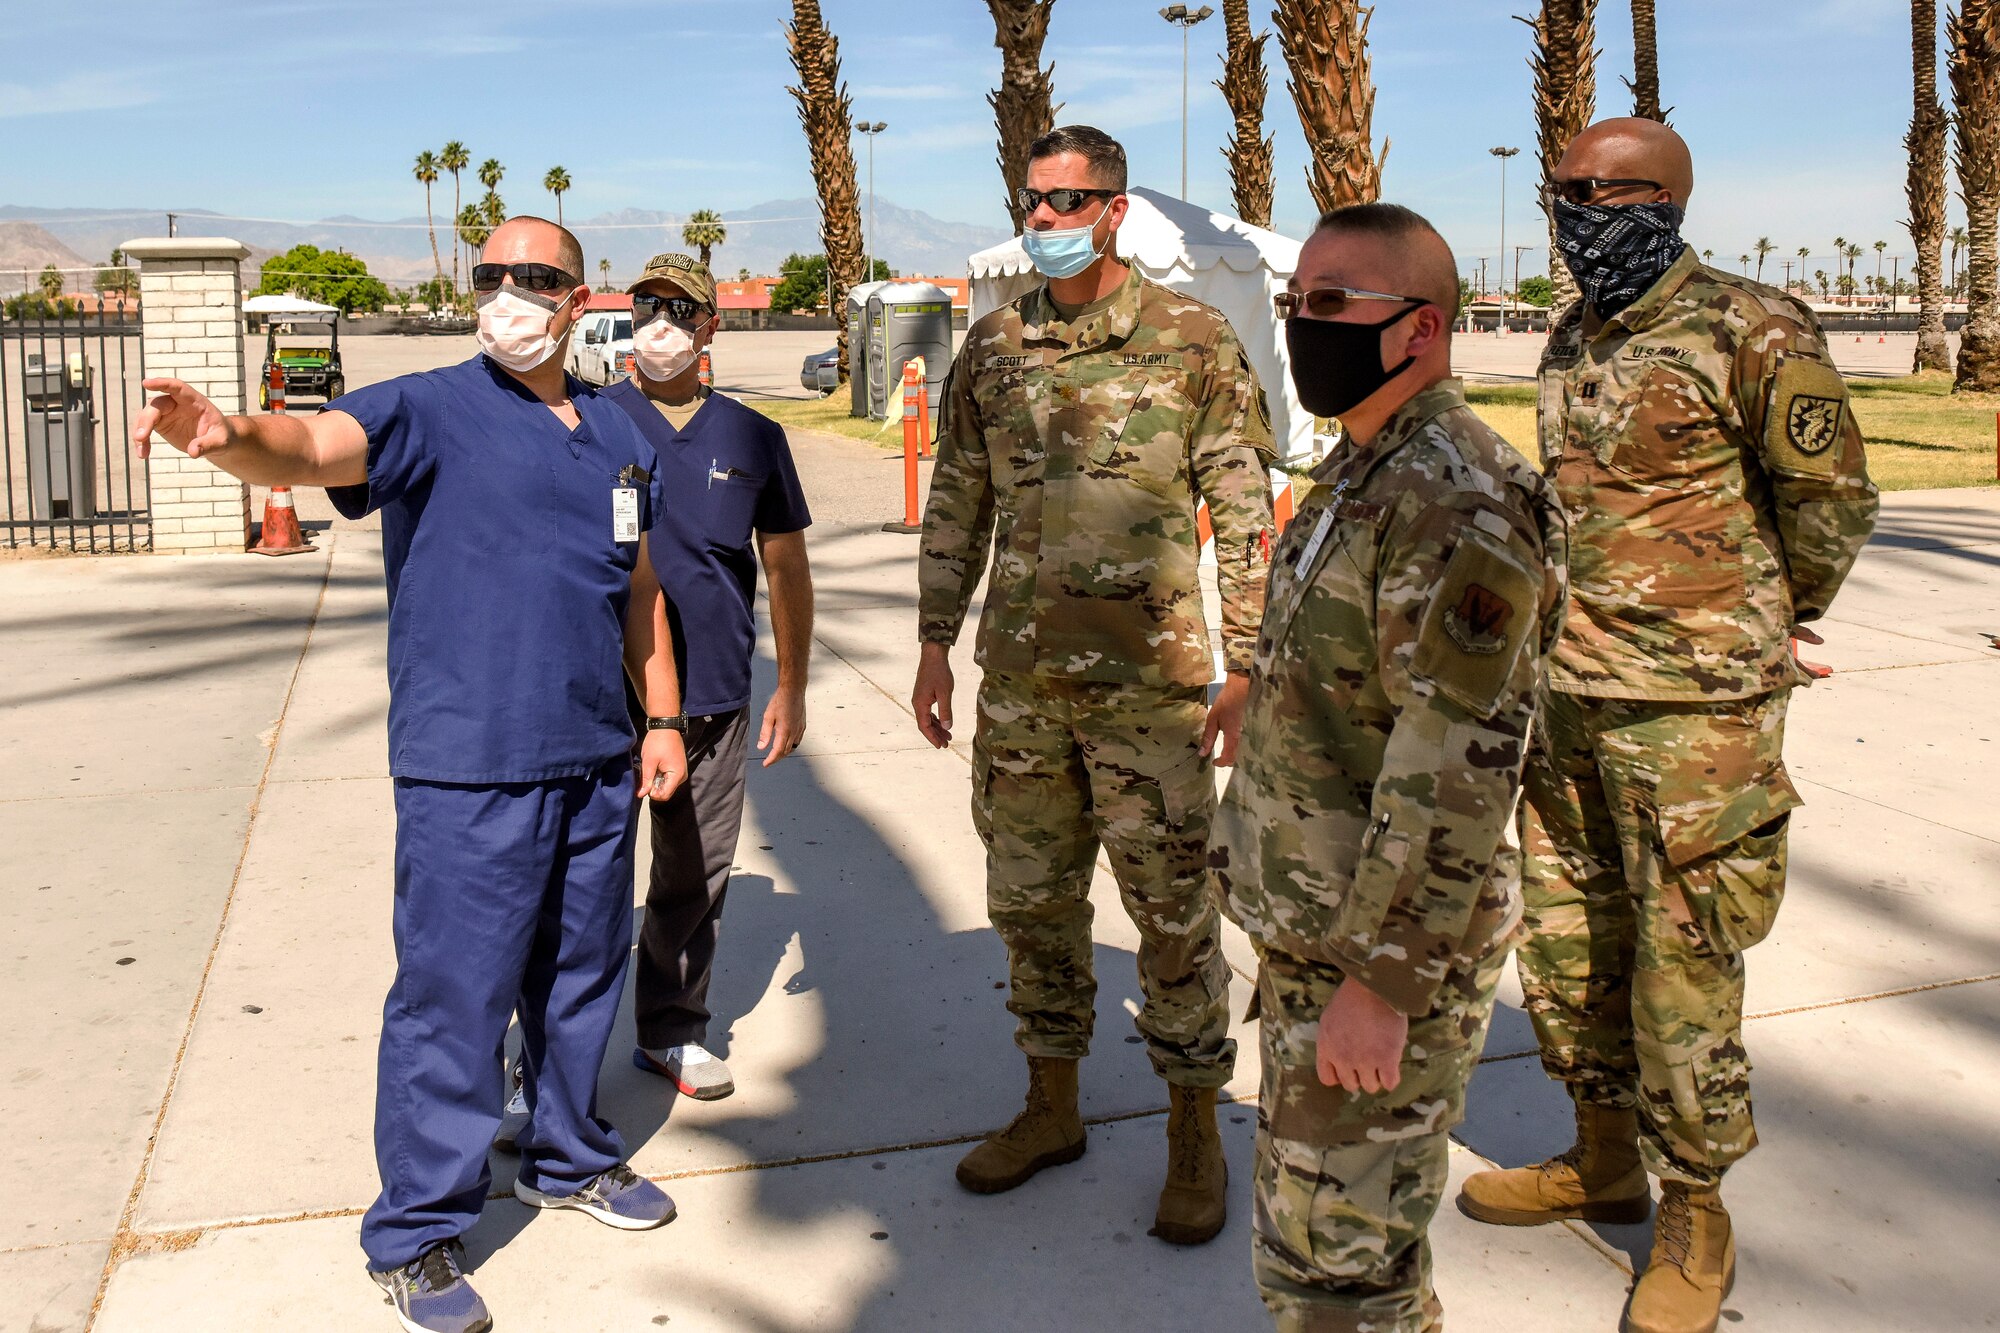 U.S. Air Force Capt. Patrick McGar, a clinical nurse with the 144th Fighter Wing, leads a tour of the Indio, California, COVID-19 testing site, May 7, 2020.